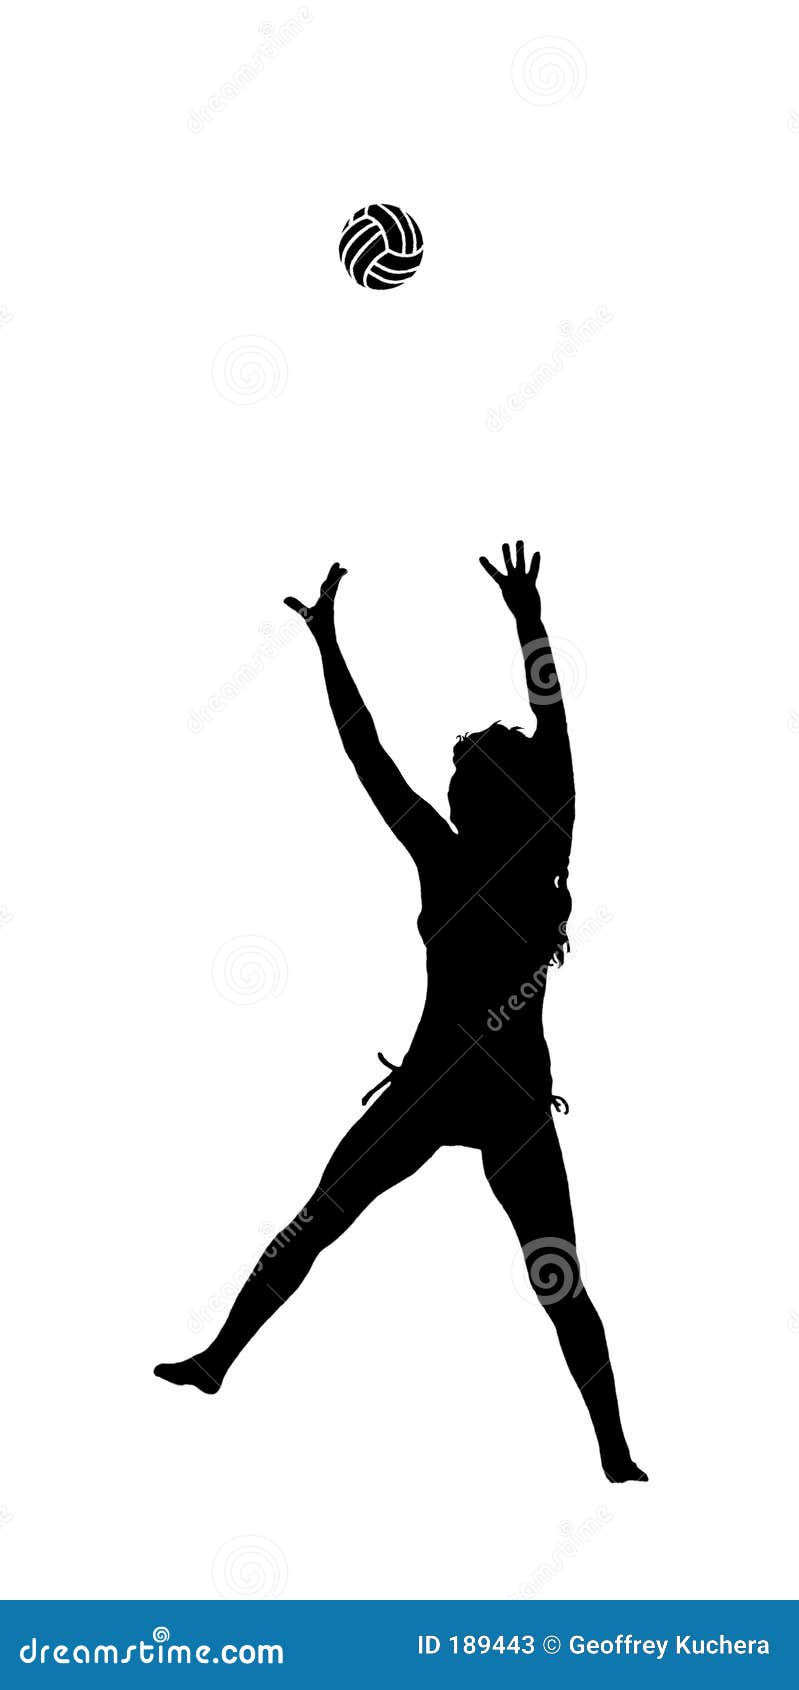 volleyball silhouette clip art - photo #43